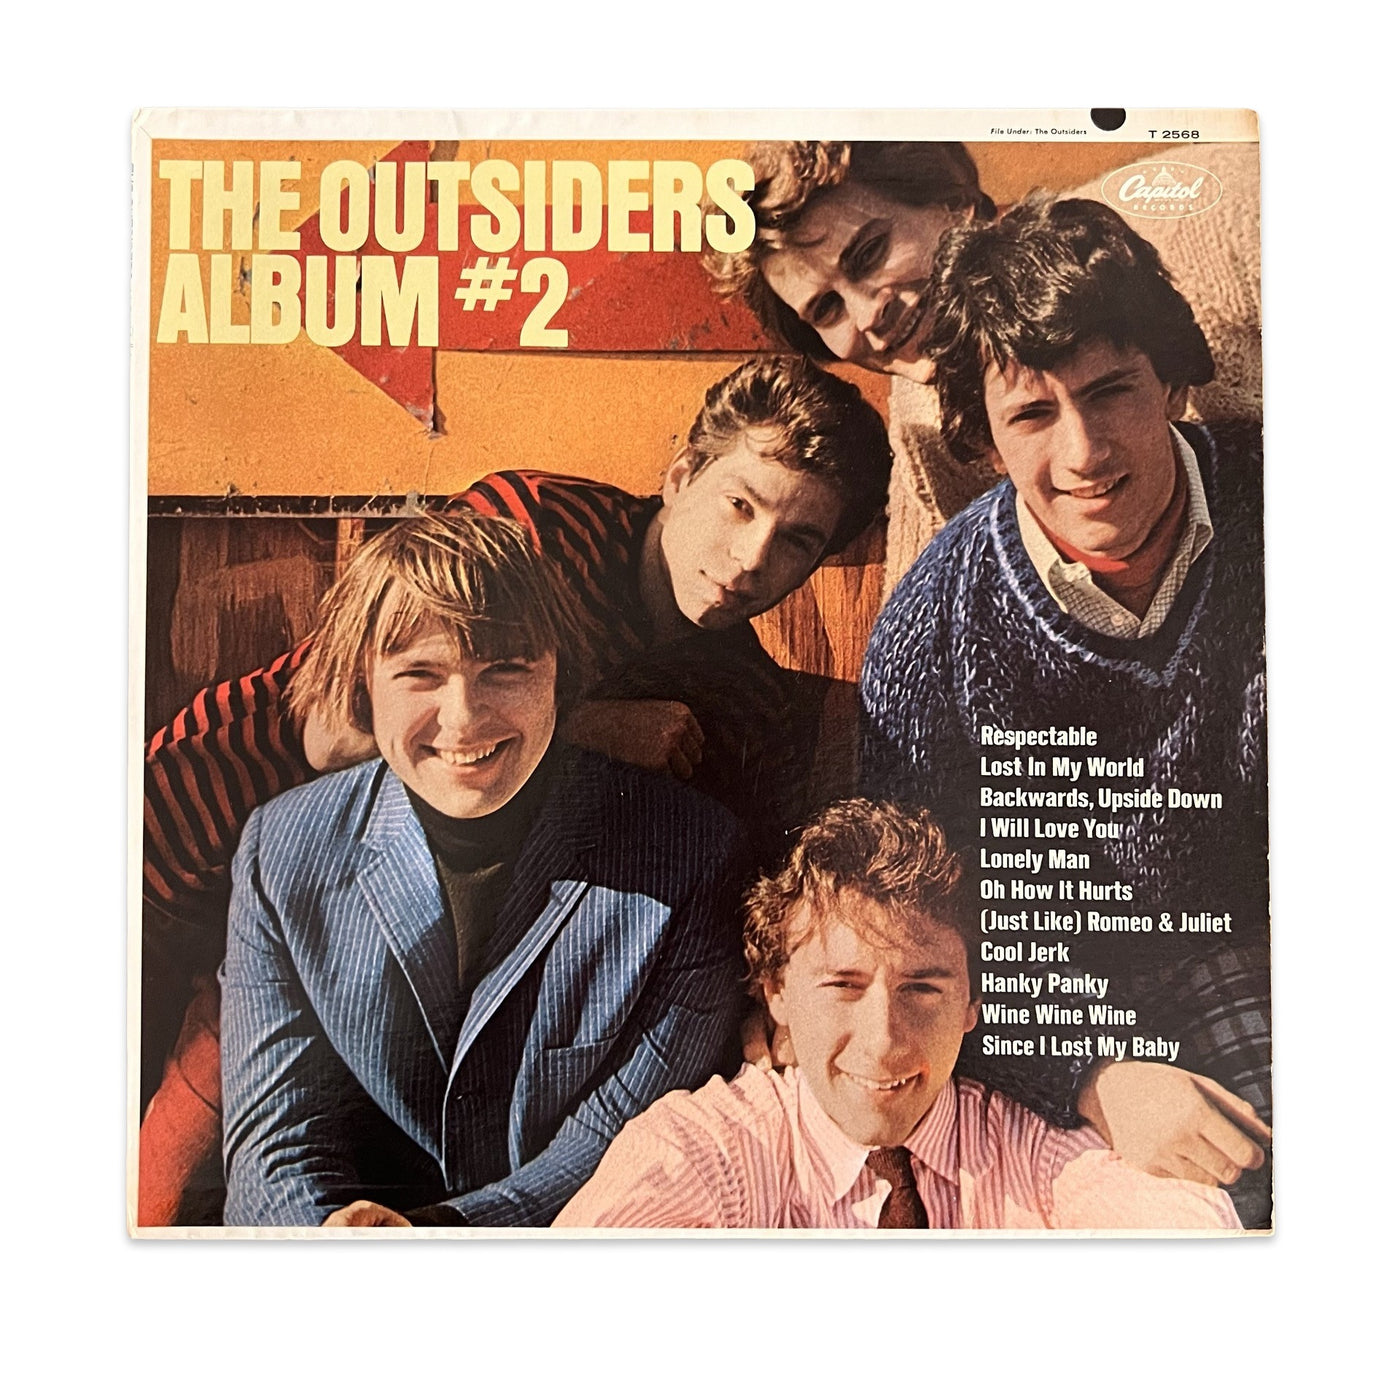 The Outsiders – Album #2